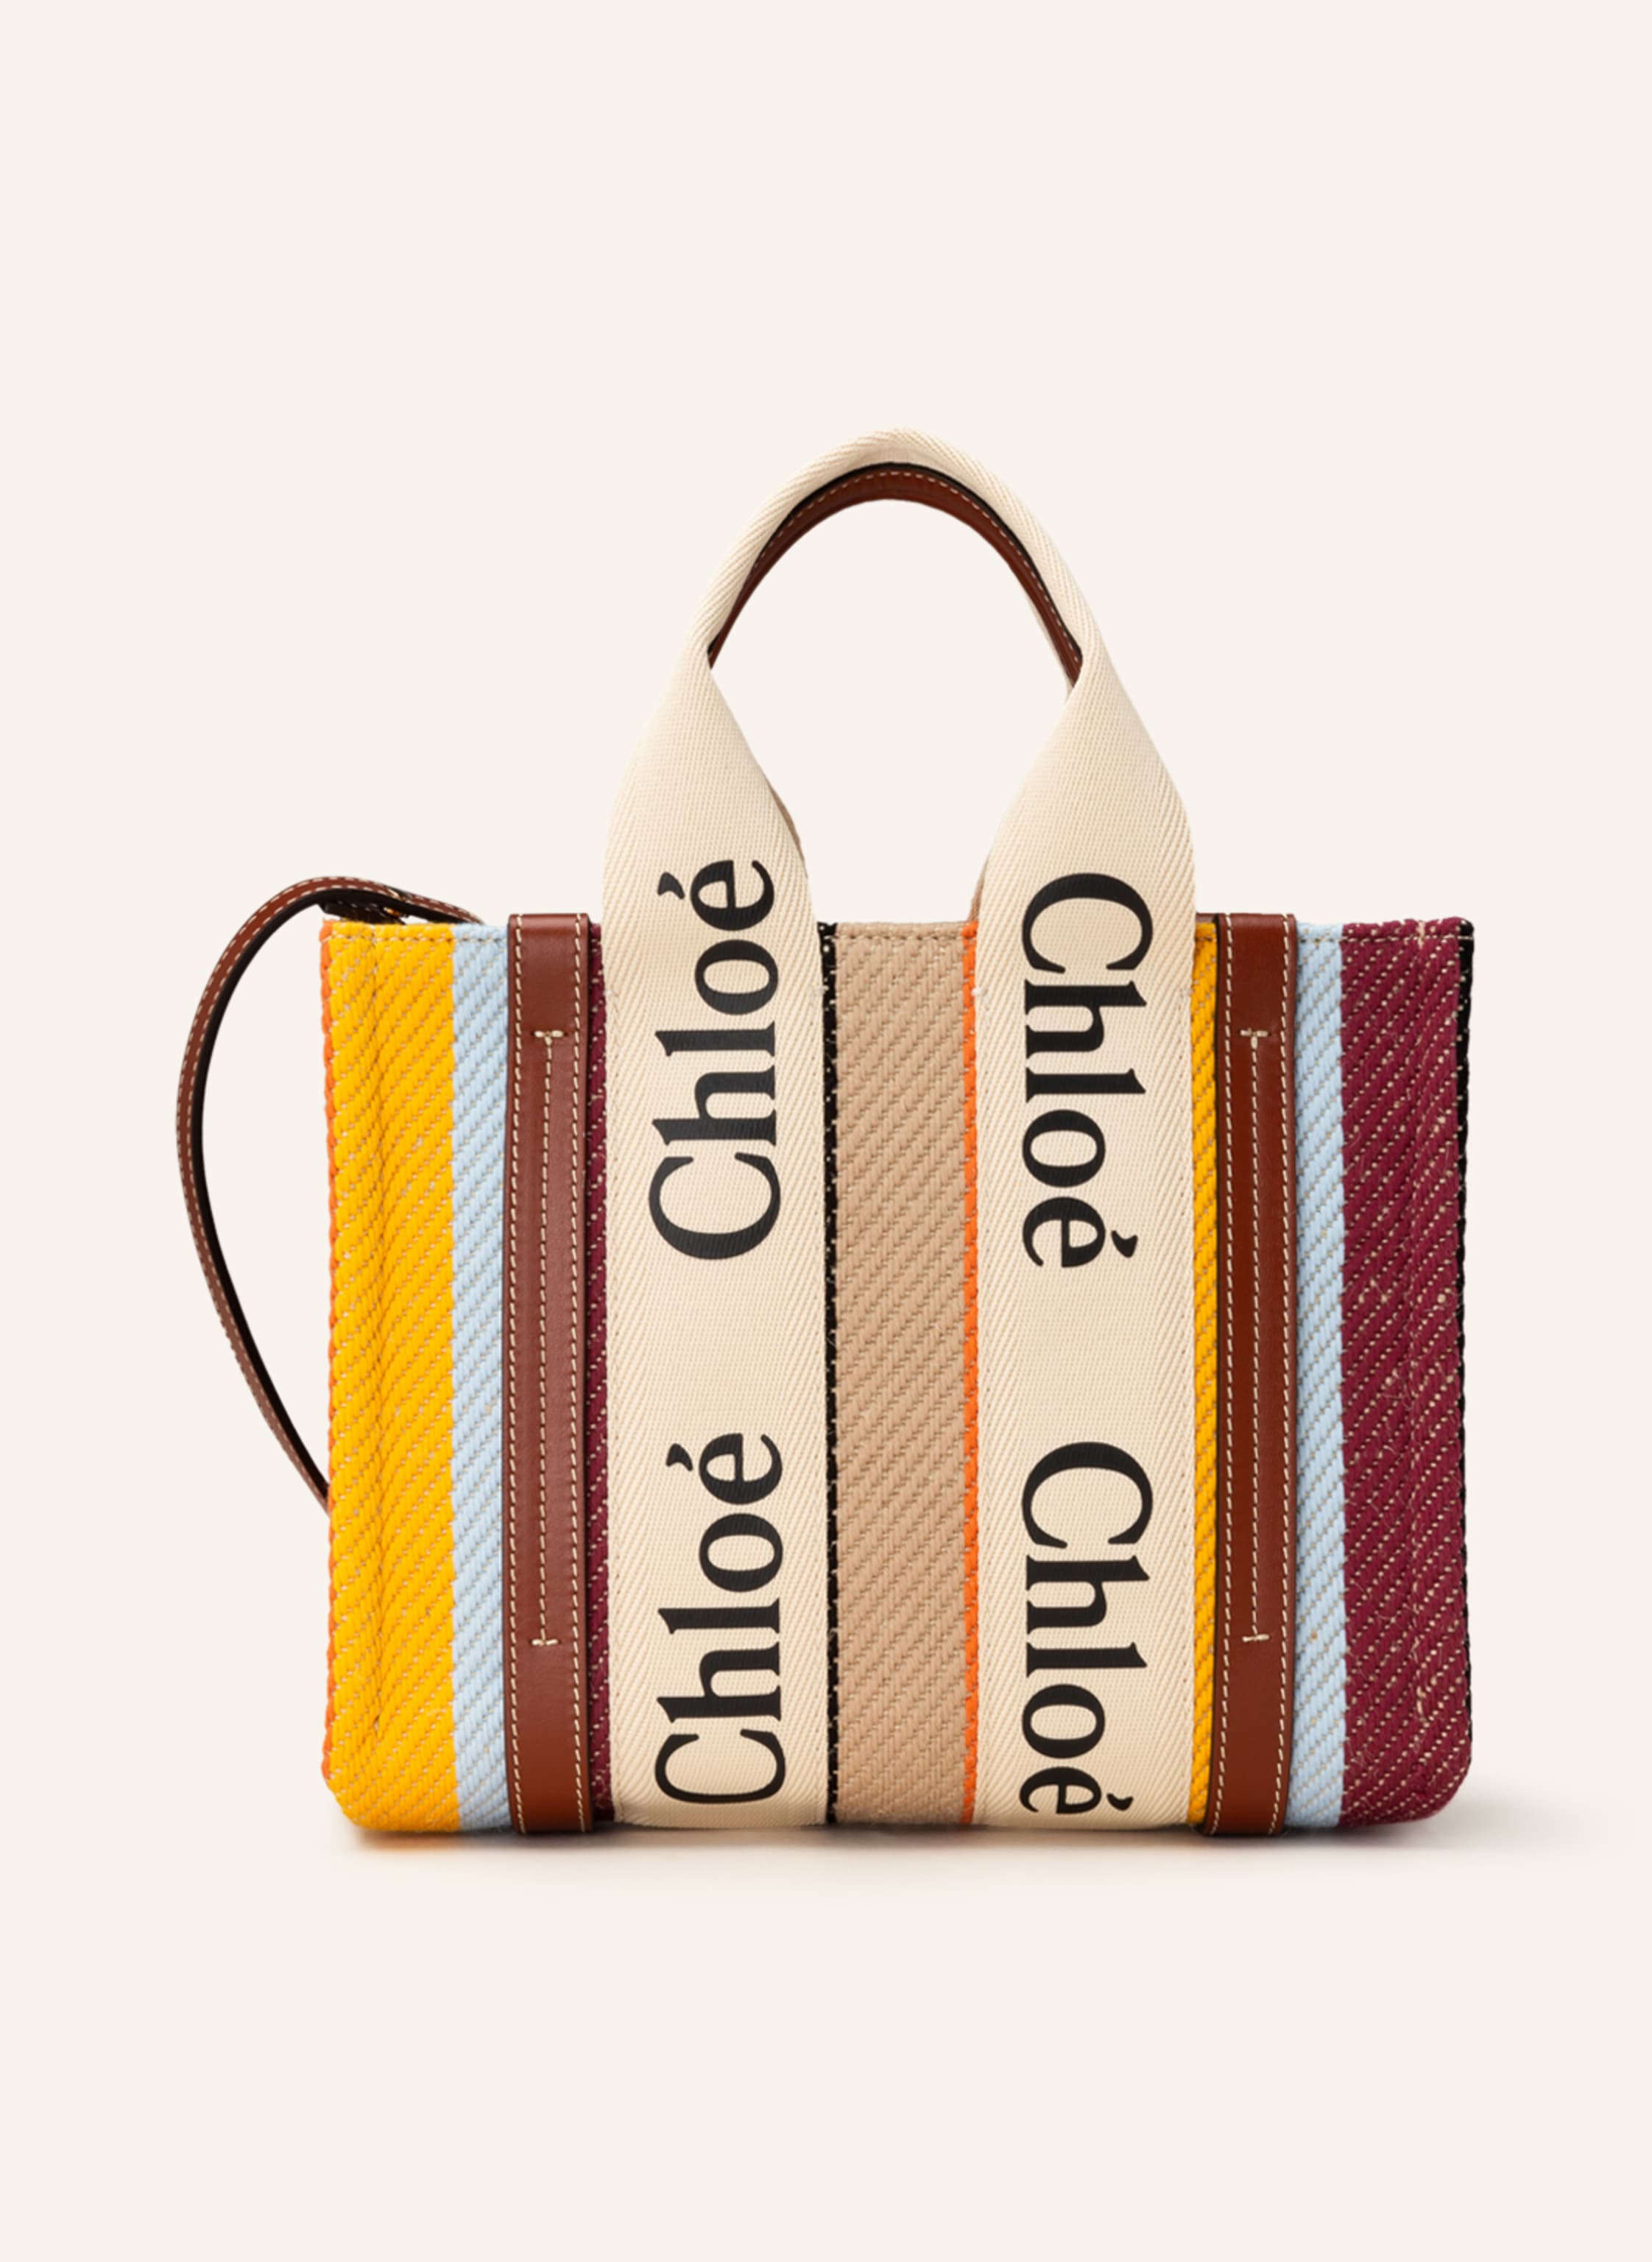 Chloé Shopper WOODY SMALL in multicolor brown | Breuninger